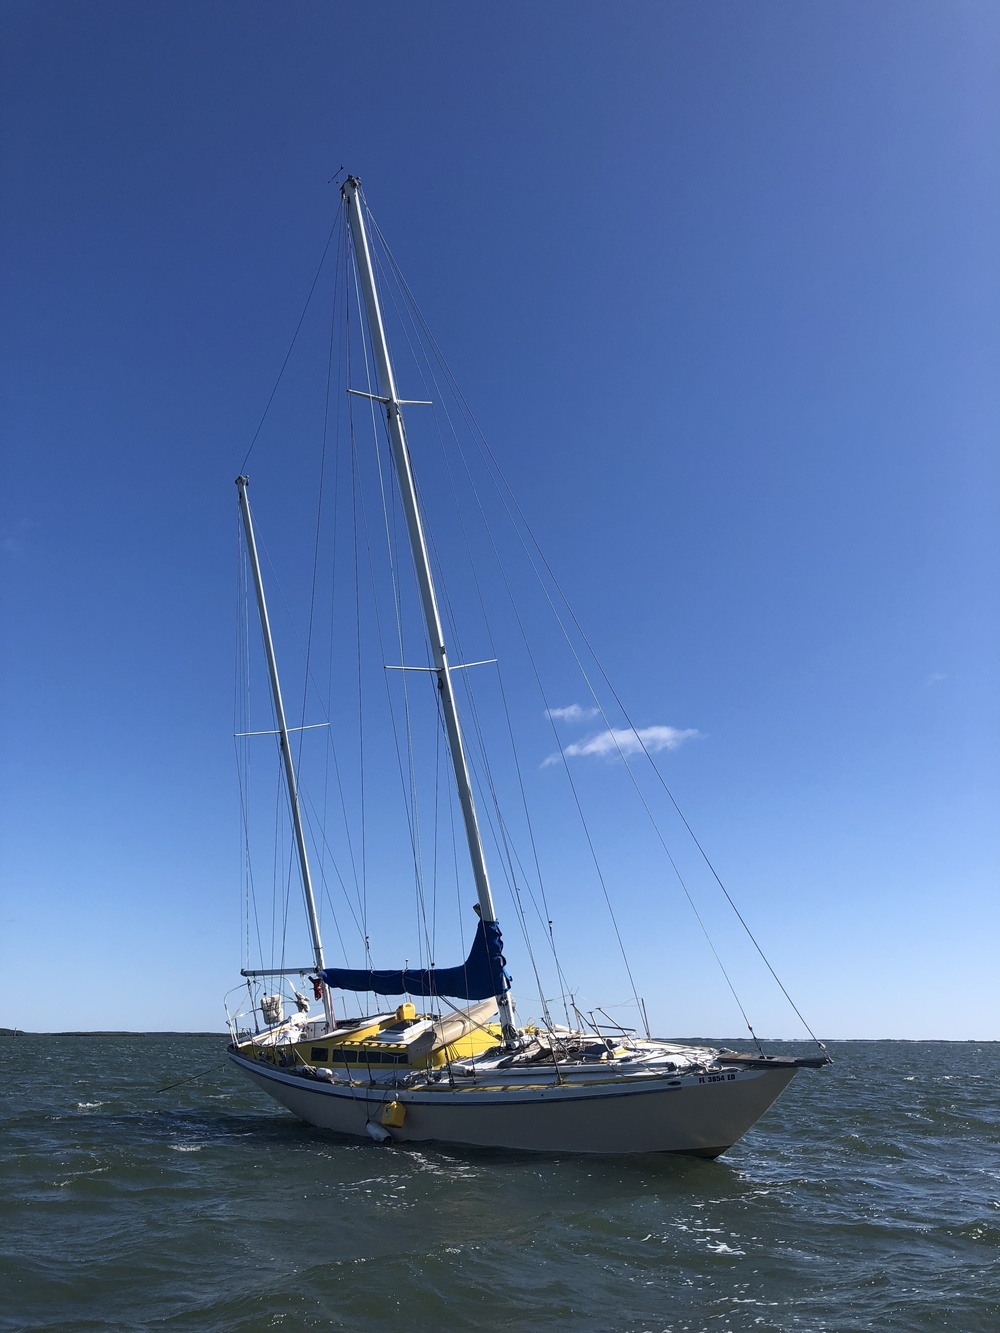 Coast Guard rescues 76-year-old boater from aground sailboat in Crystal River